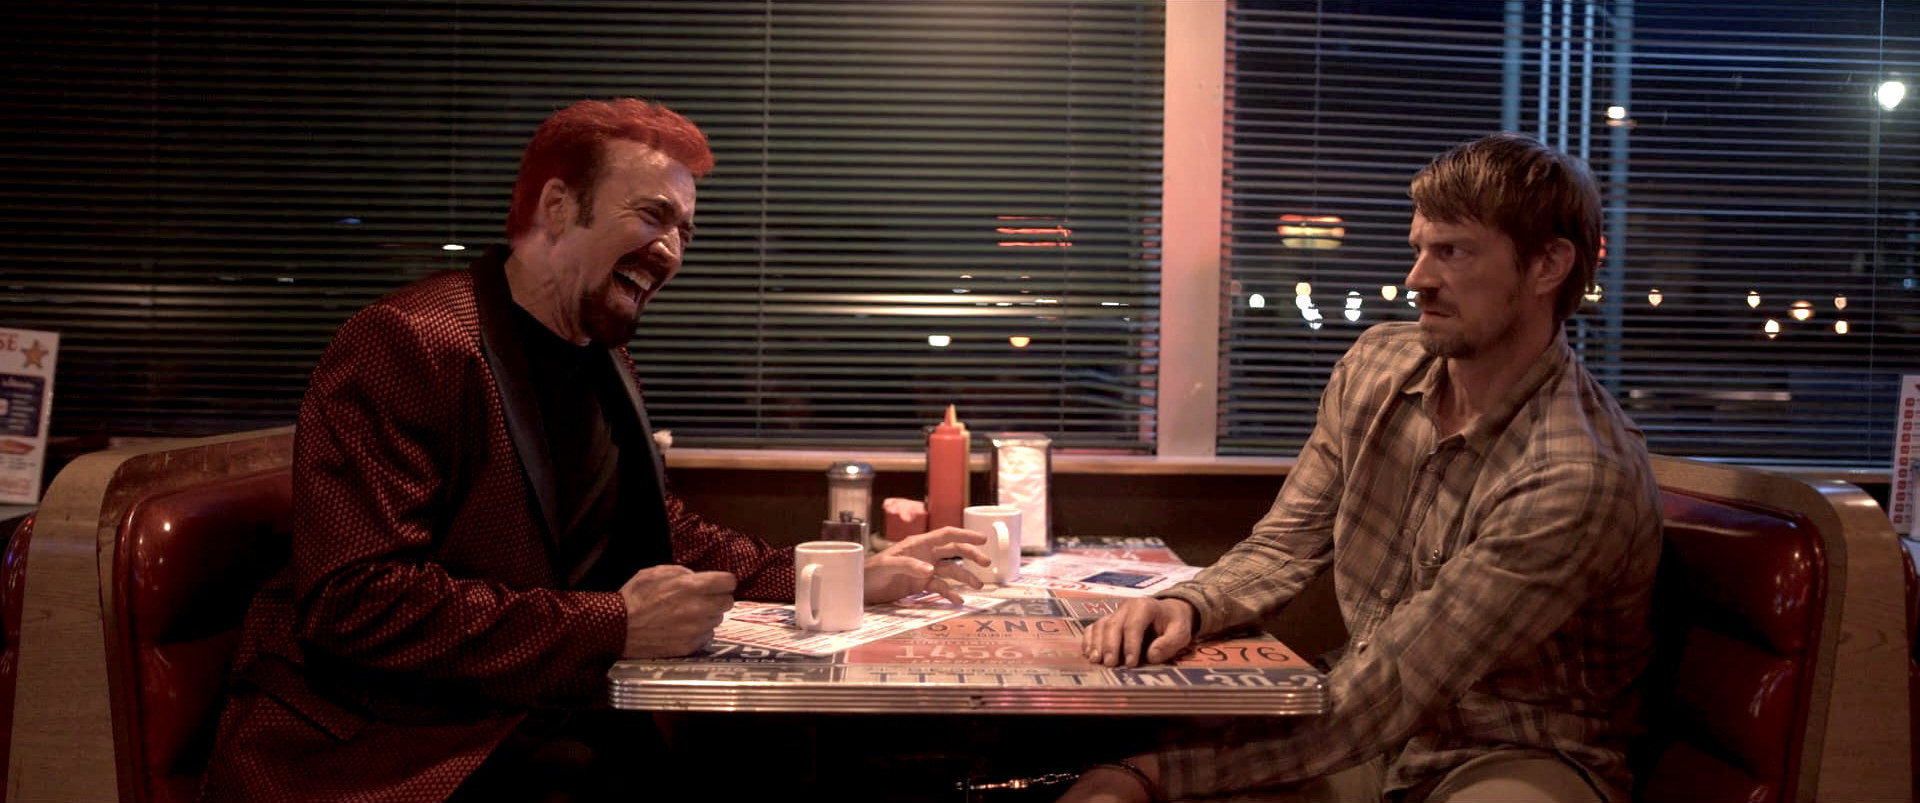 Two men talk at a diner table